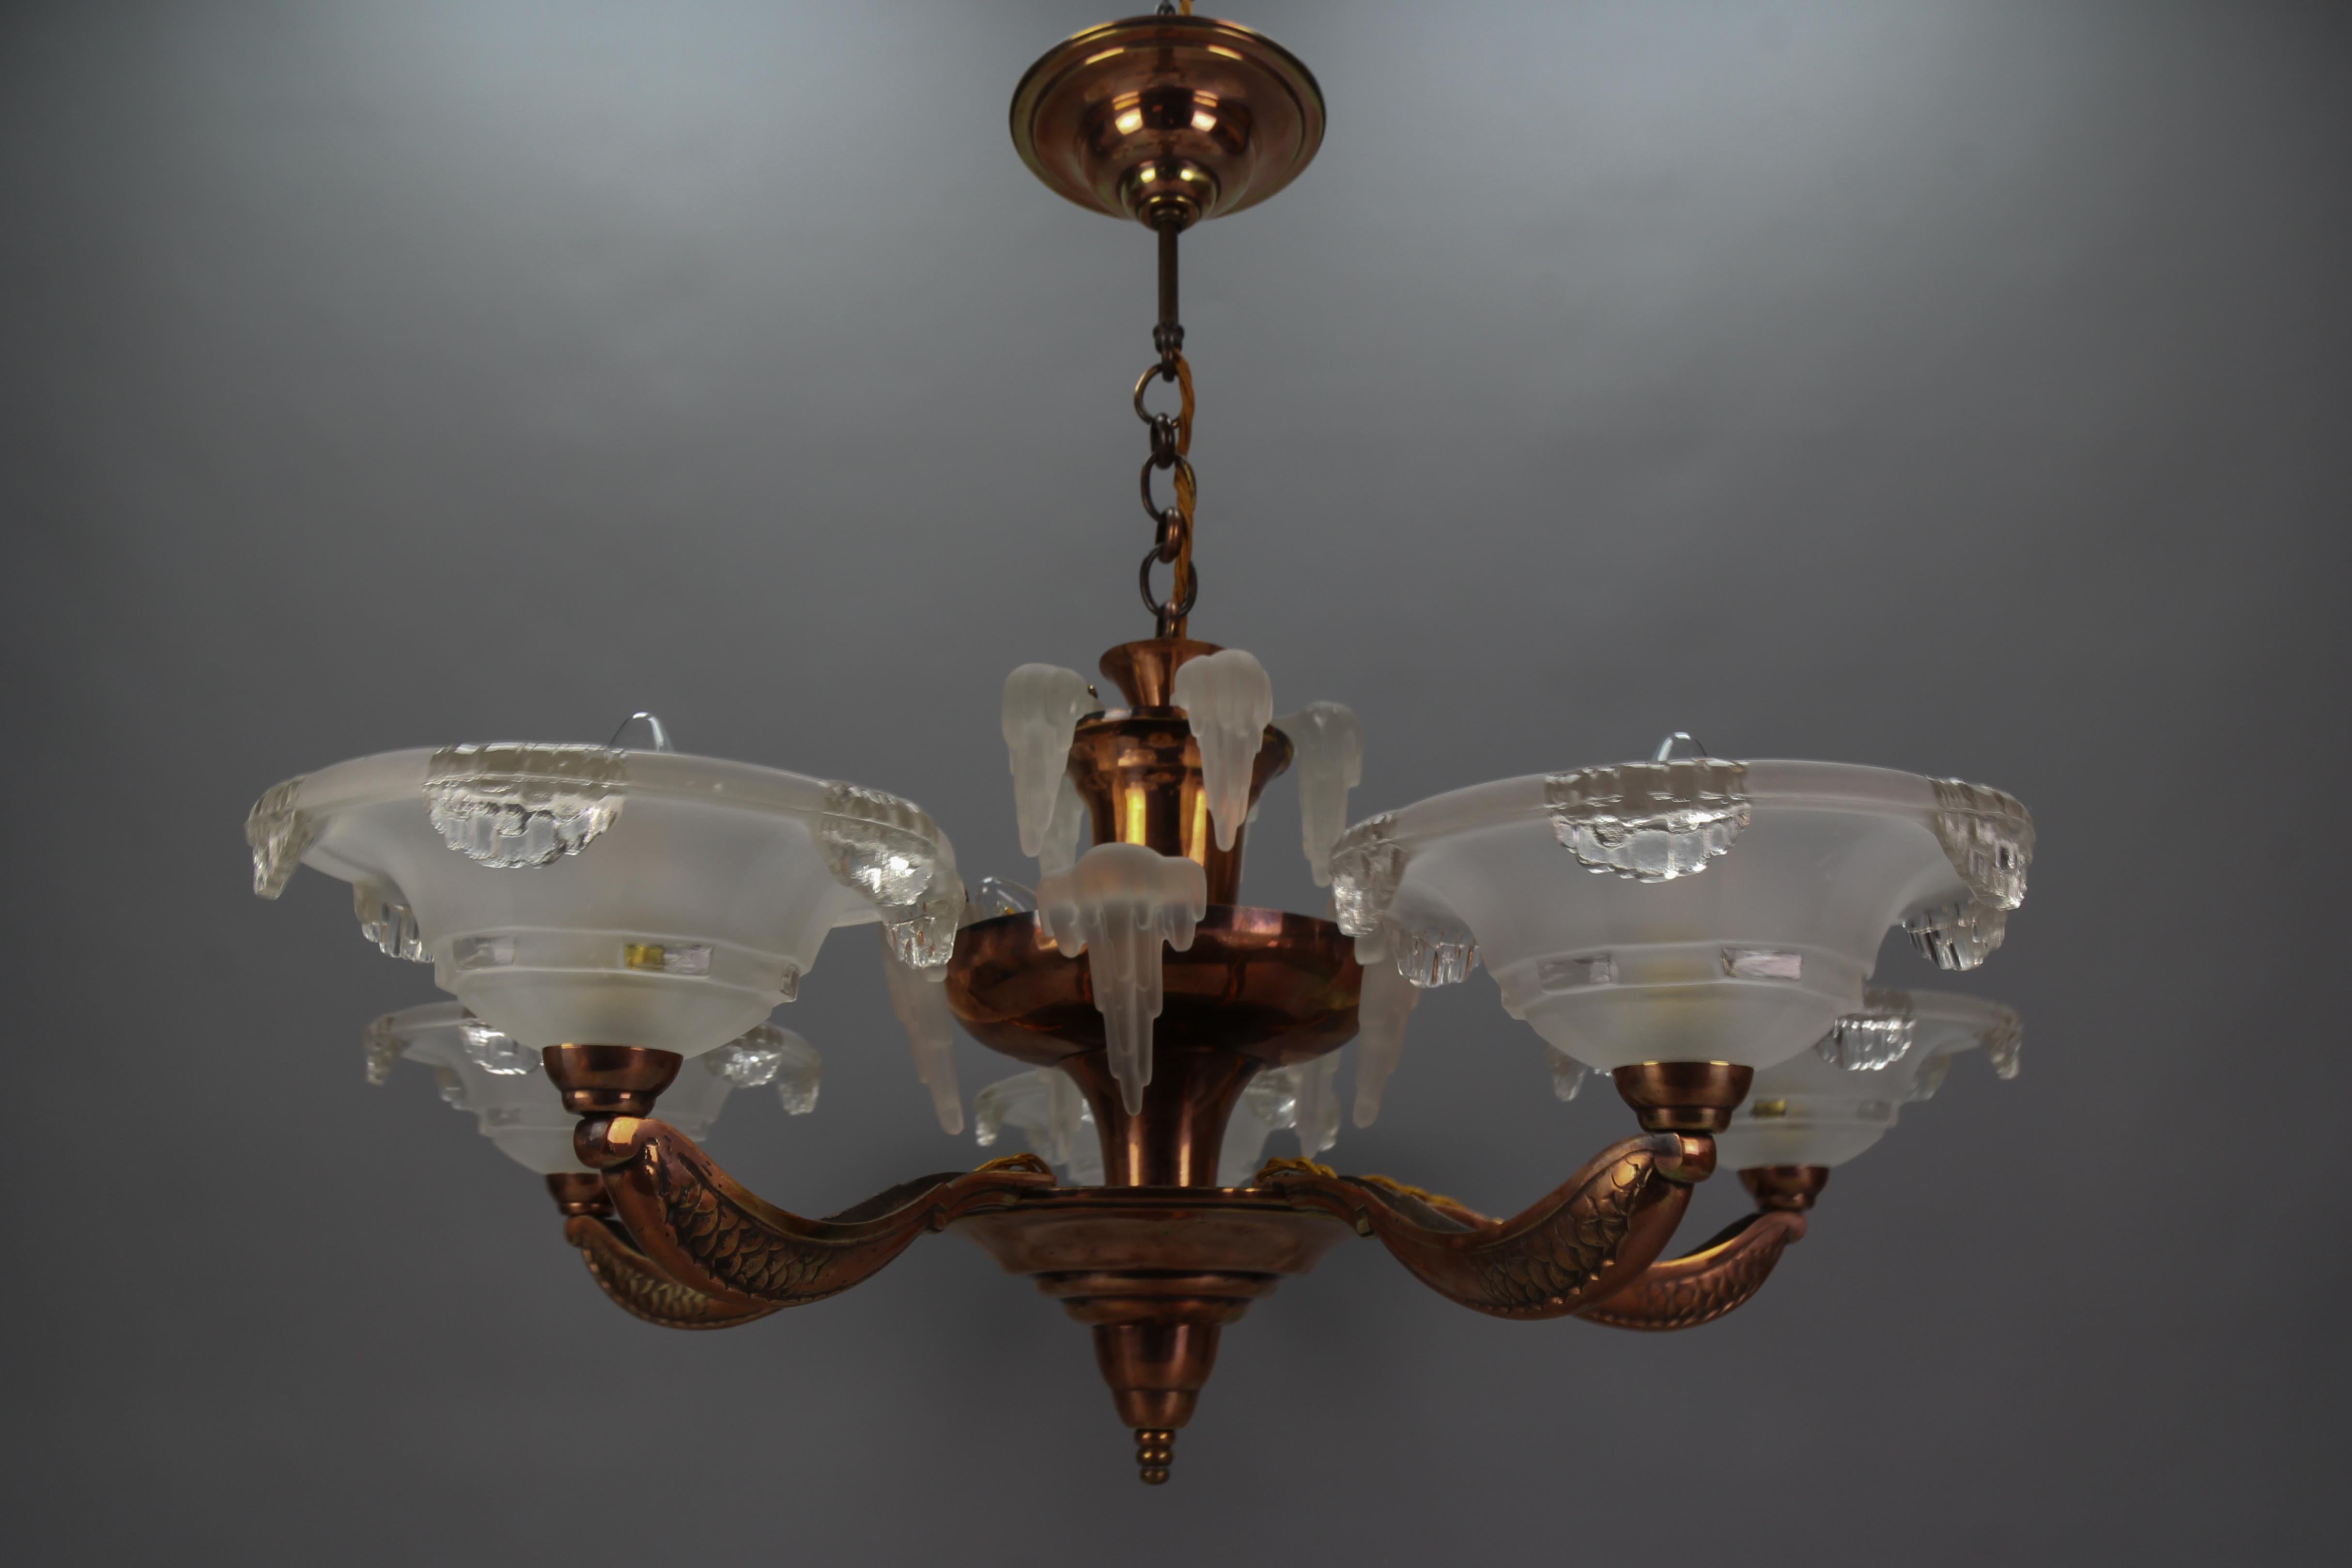 French Art Deco 7-light frosted glass, brass, and copper chandelier, circa the 1930s.
This magnificent chandelier, attributed to Ezan, typically Parisian from the 1930s, is made of copper, brass, and white frosted glass. The chandelier features a